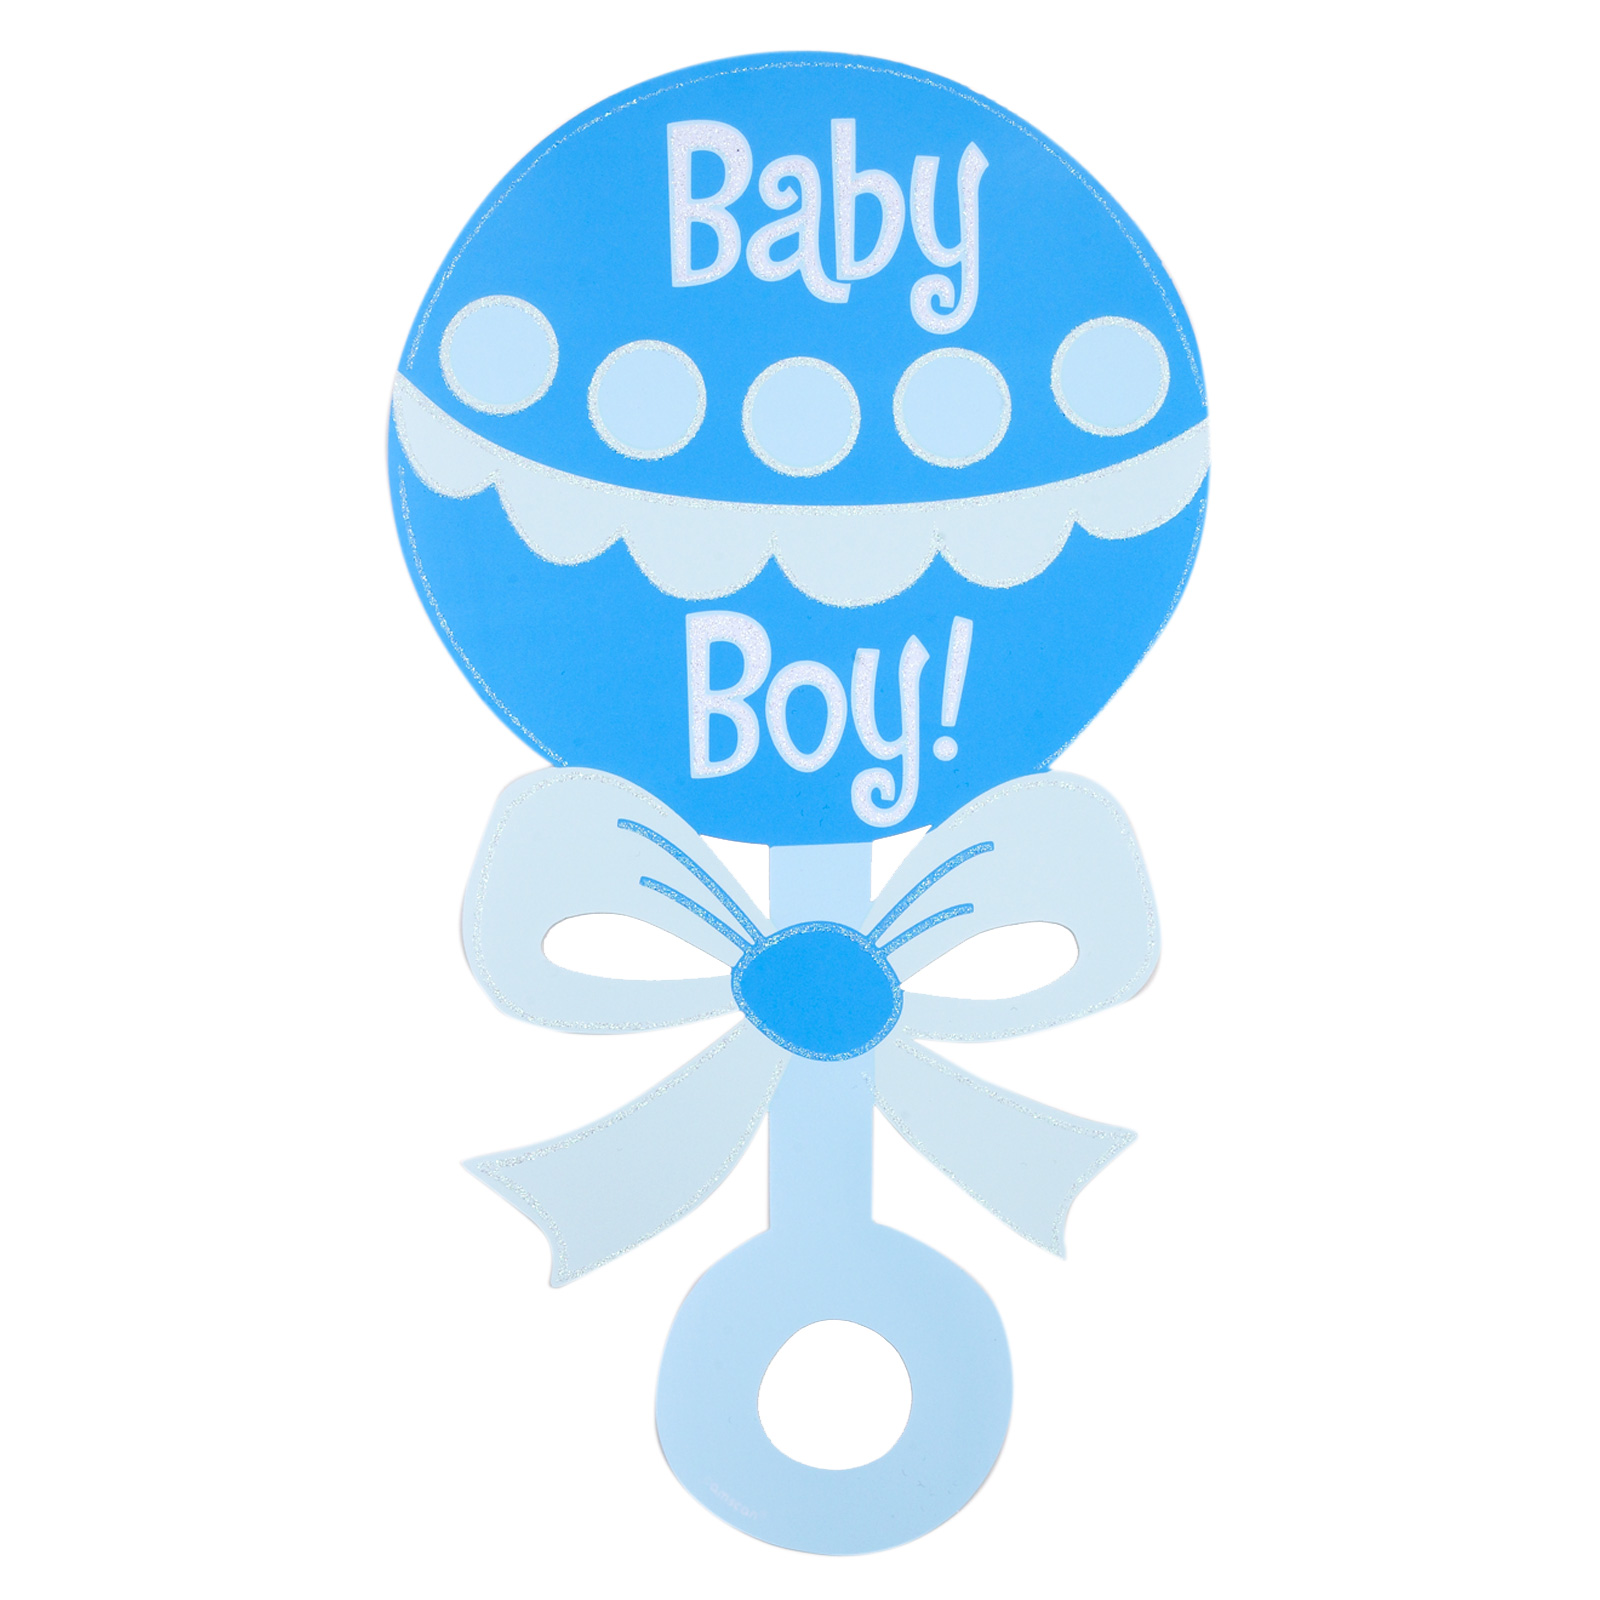 Baby rattle clipart 3